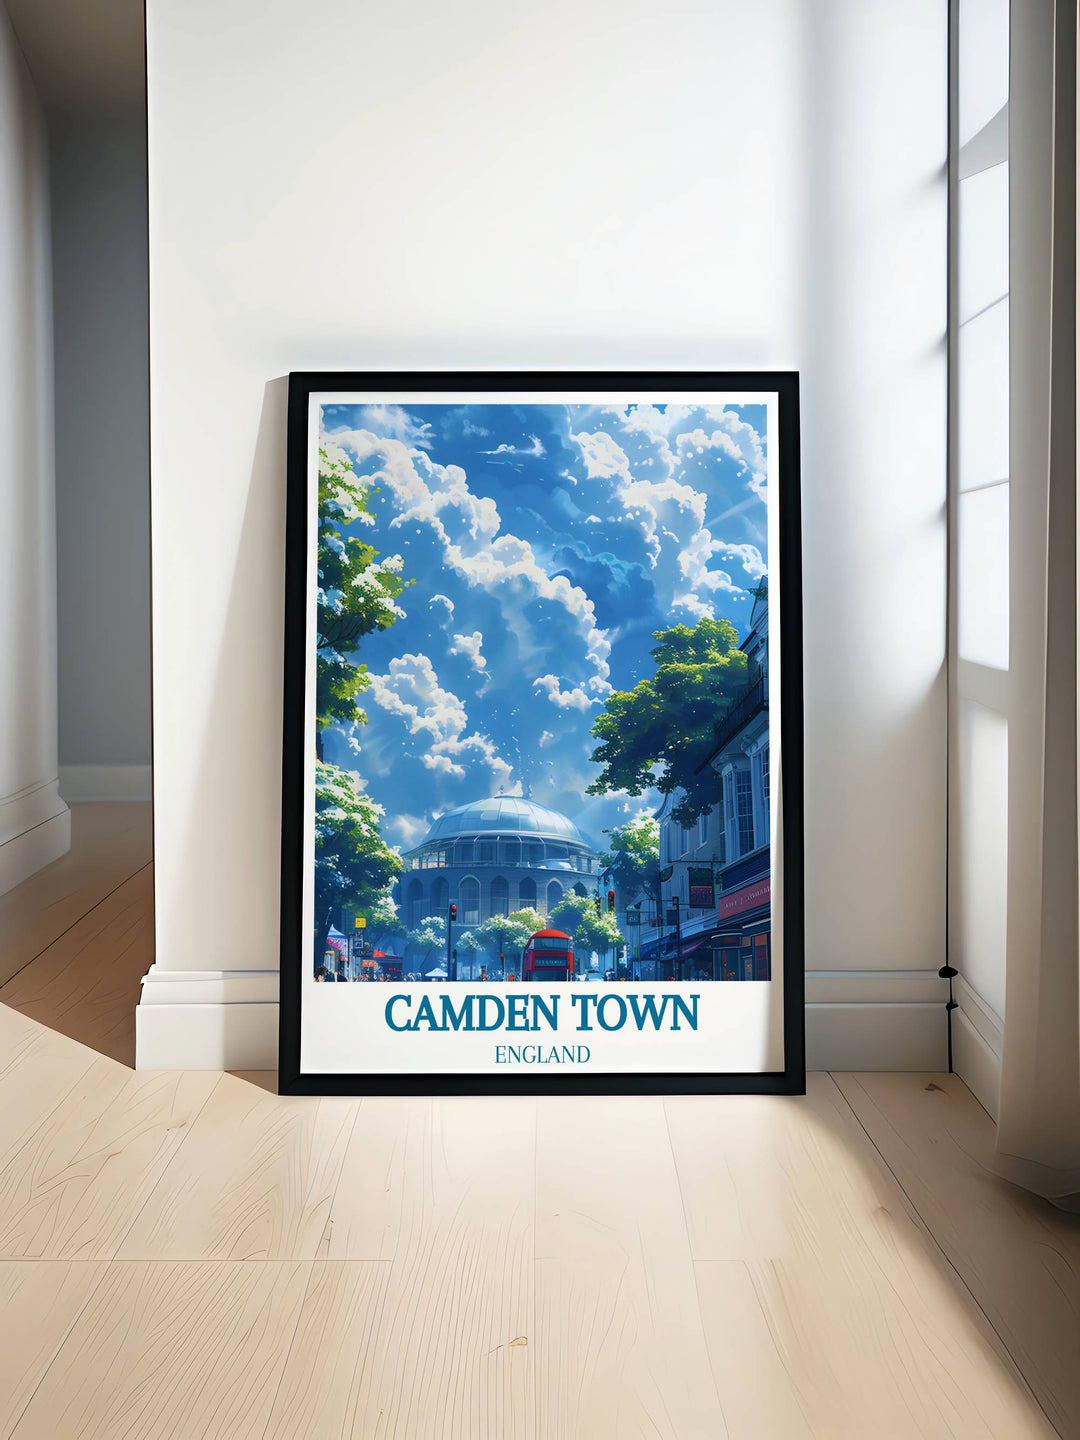 Stunning Camden Town London print featuring The Roundhouse and Camden Market Art a perfect addition to any home decor or art collection capturing the vibrant energy and unique spirit of one of Londons most dynamic neighborhoods.